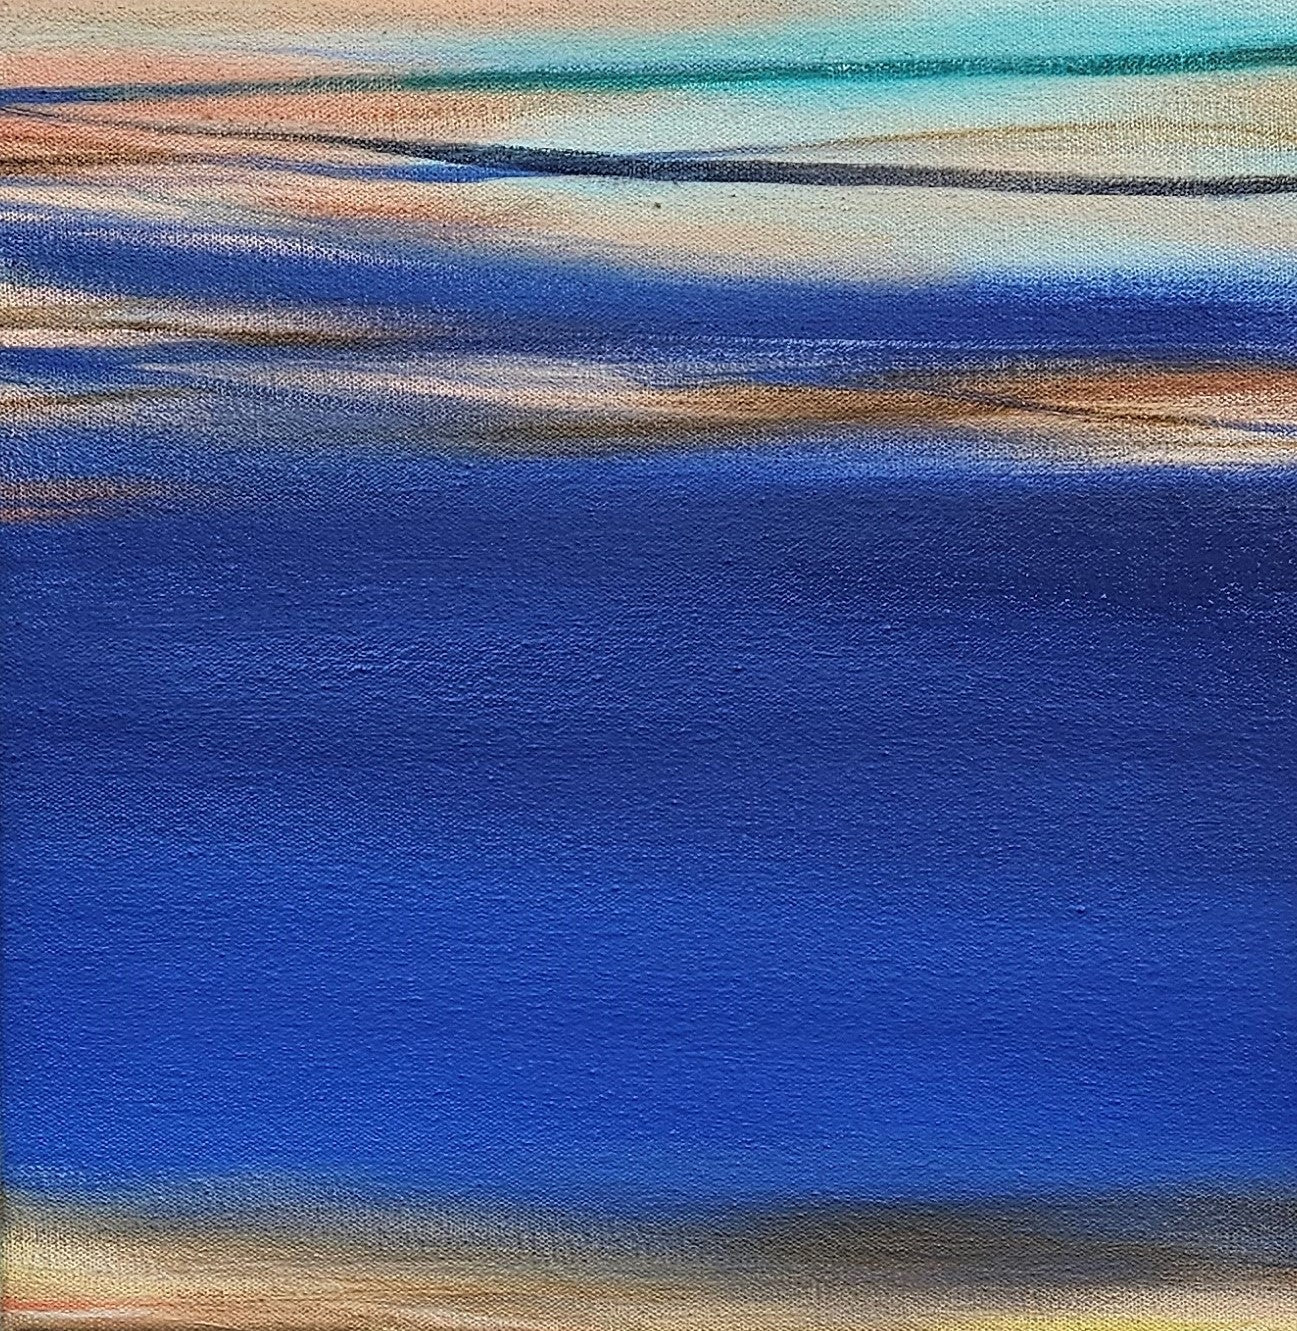 'WAVES' oil on canvas